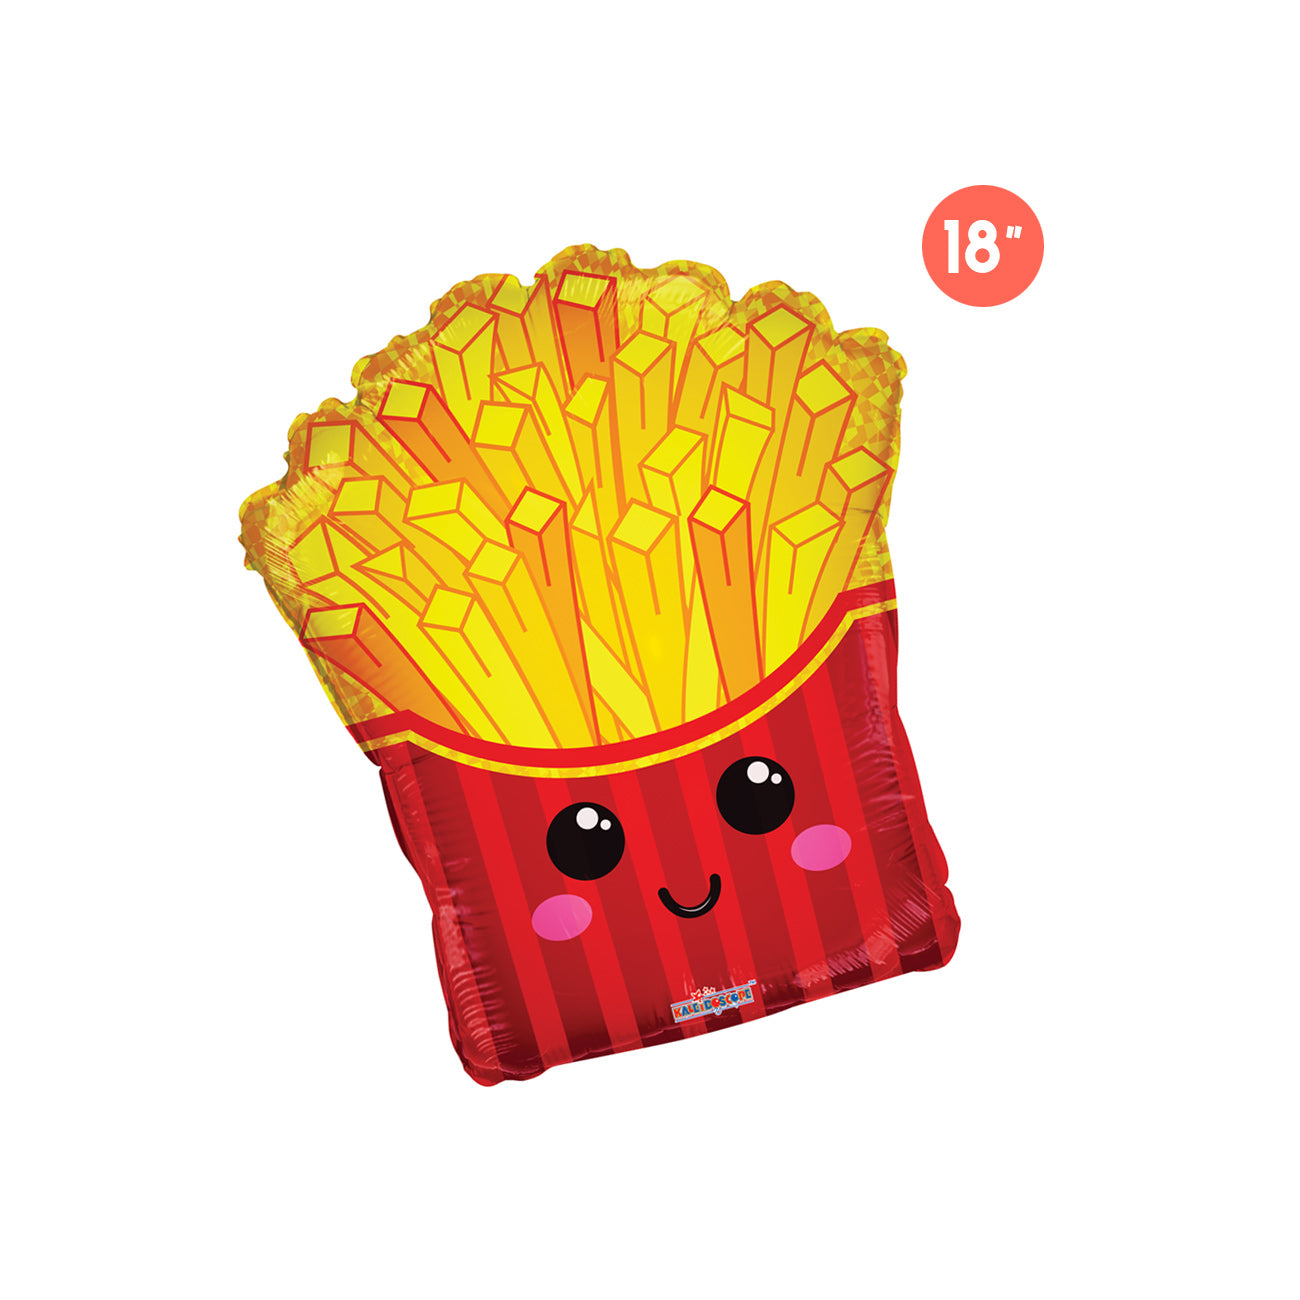 Cute Fries Foil Balloon 18" - Food Balloon, Fast Food Balloon, Kids Birthday Party Decorations